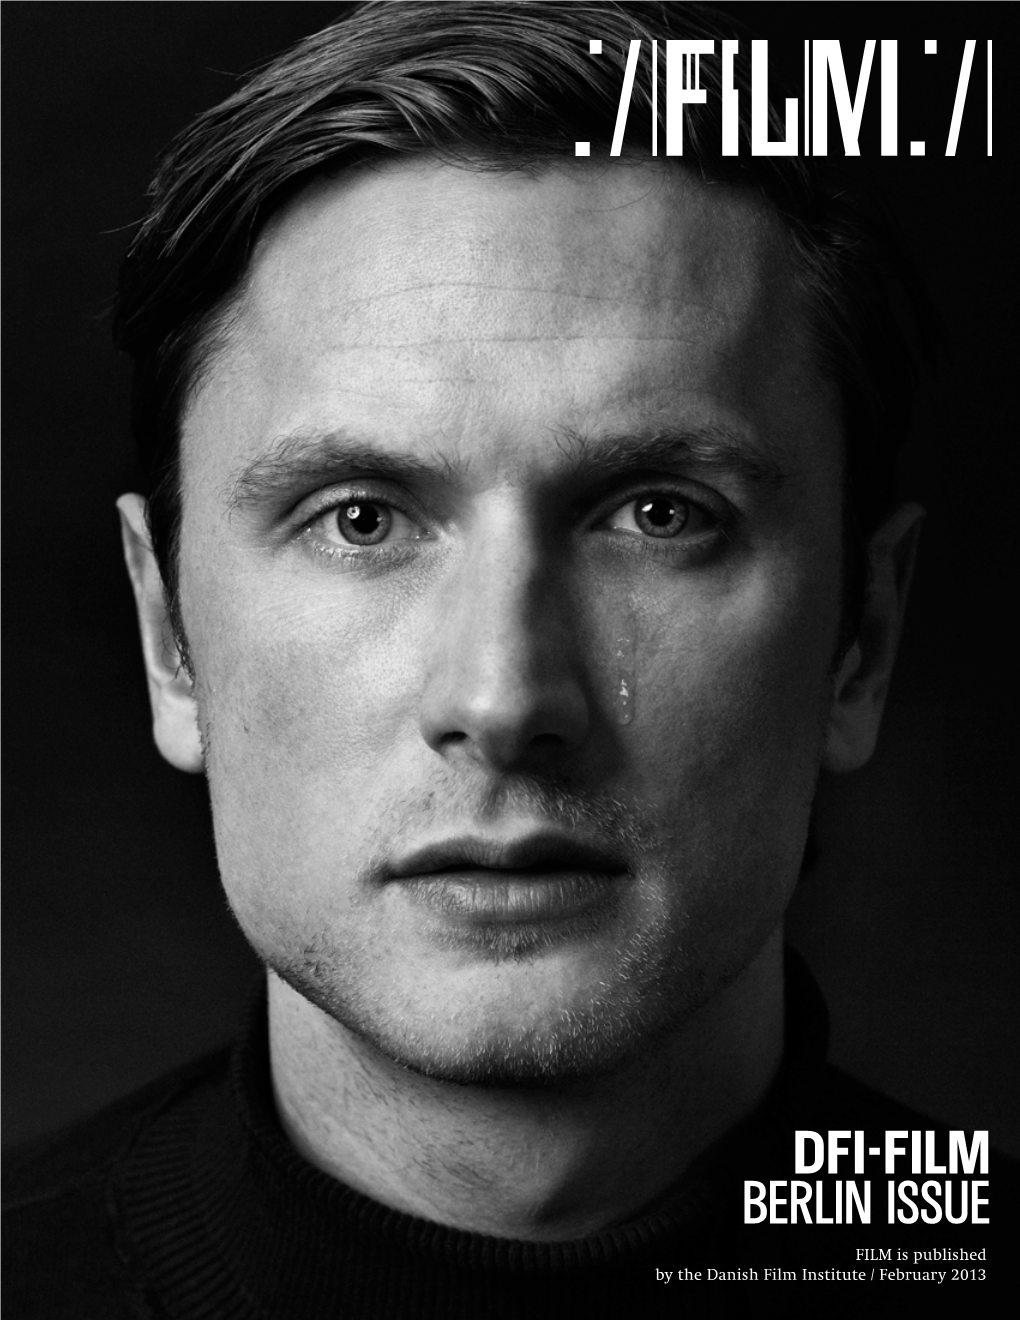 DFI-FILM Berlin ISSUE FILM Is Published by the Danish Film Institute / February 2013 Category DFI-FILM | Berlin Issue | Page 2